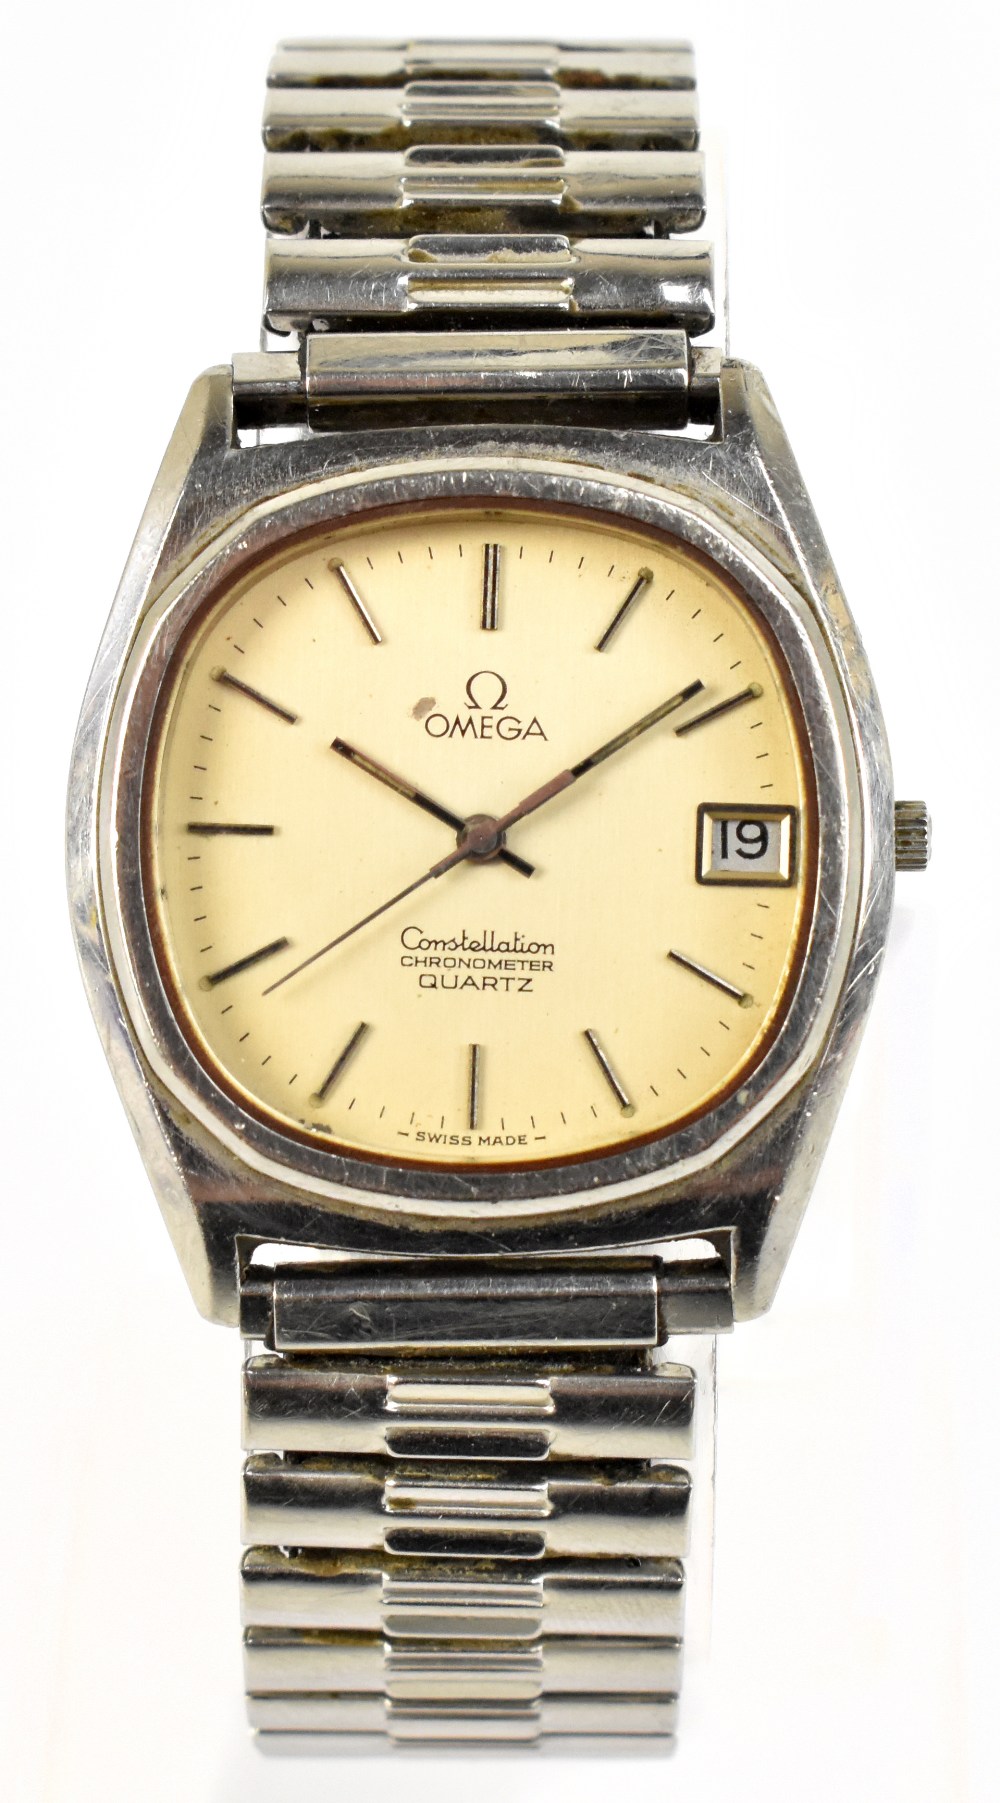 OMEGA; an early 1970s Constellation chronometer quartz stainless steel wristwatch with date aperture